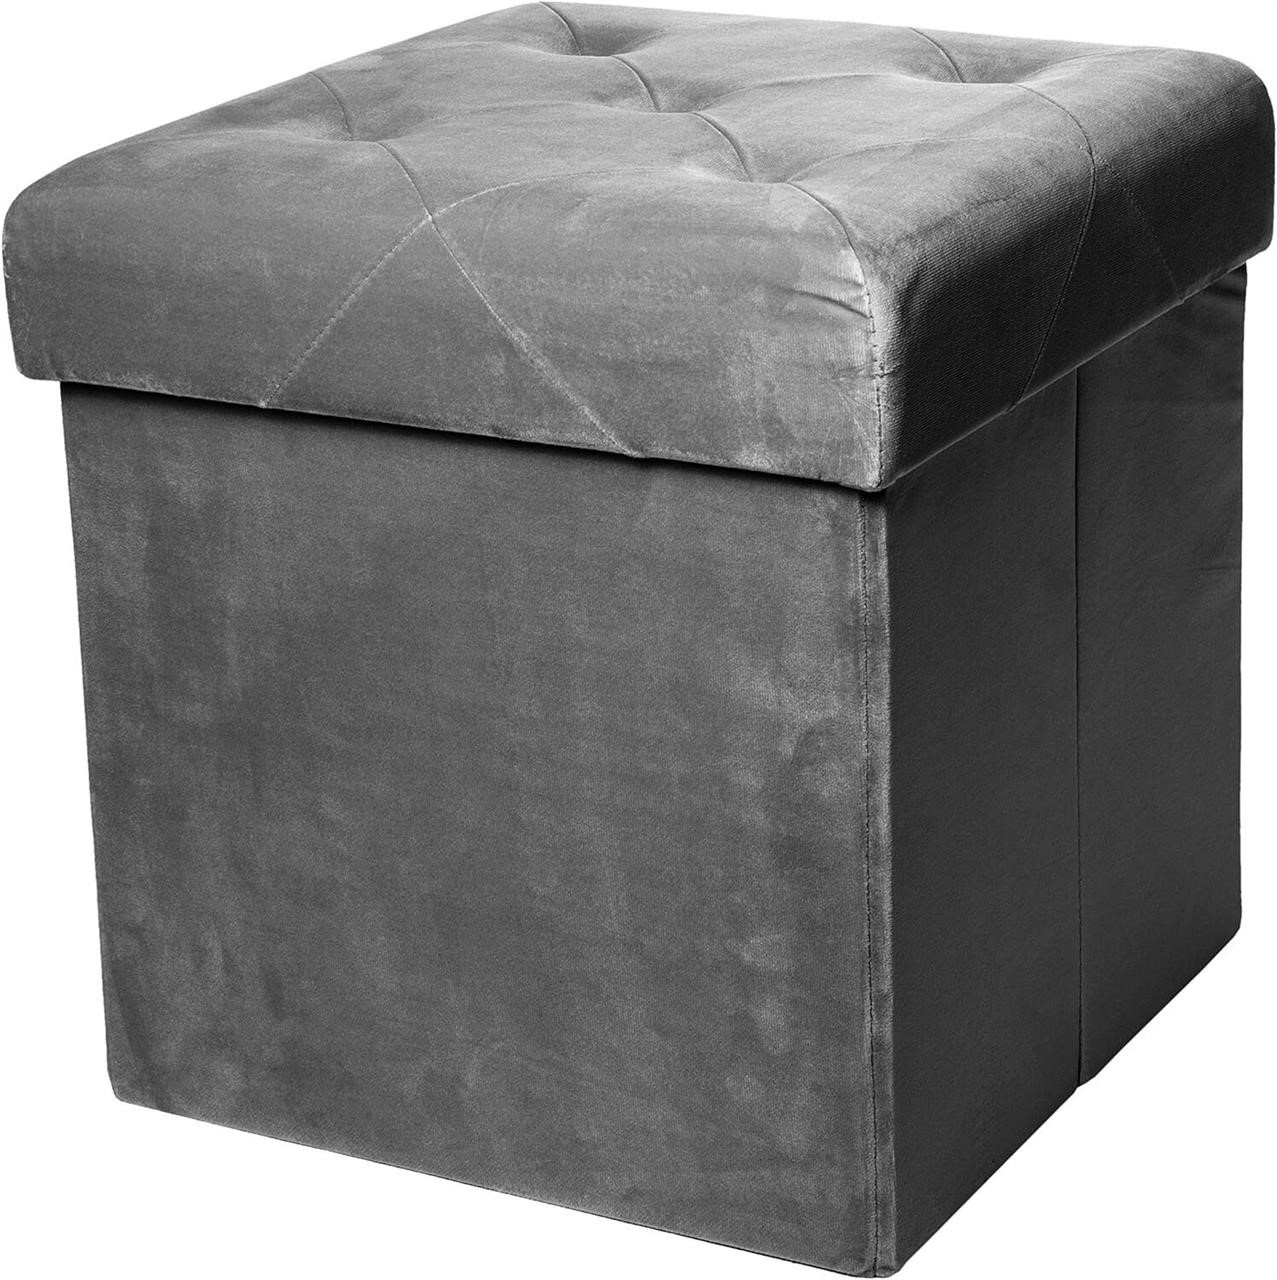 Red Co. Square Luxury Storage Ottoman with Padded